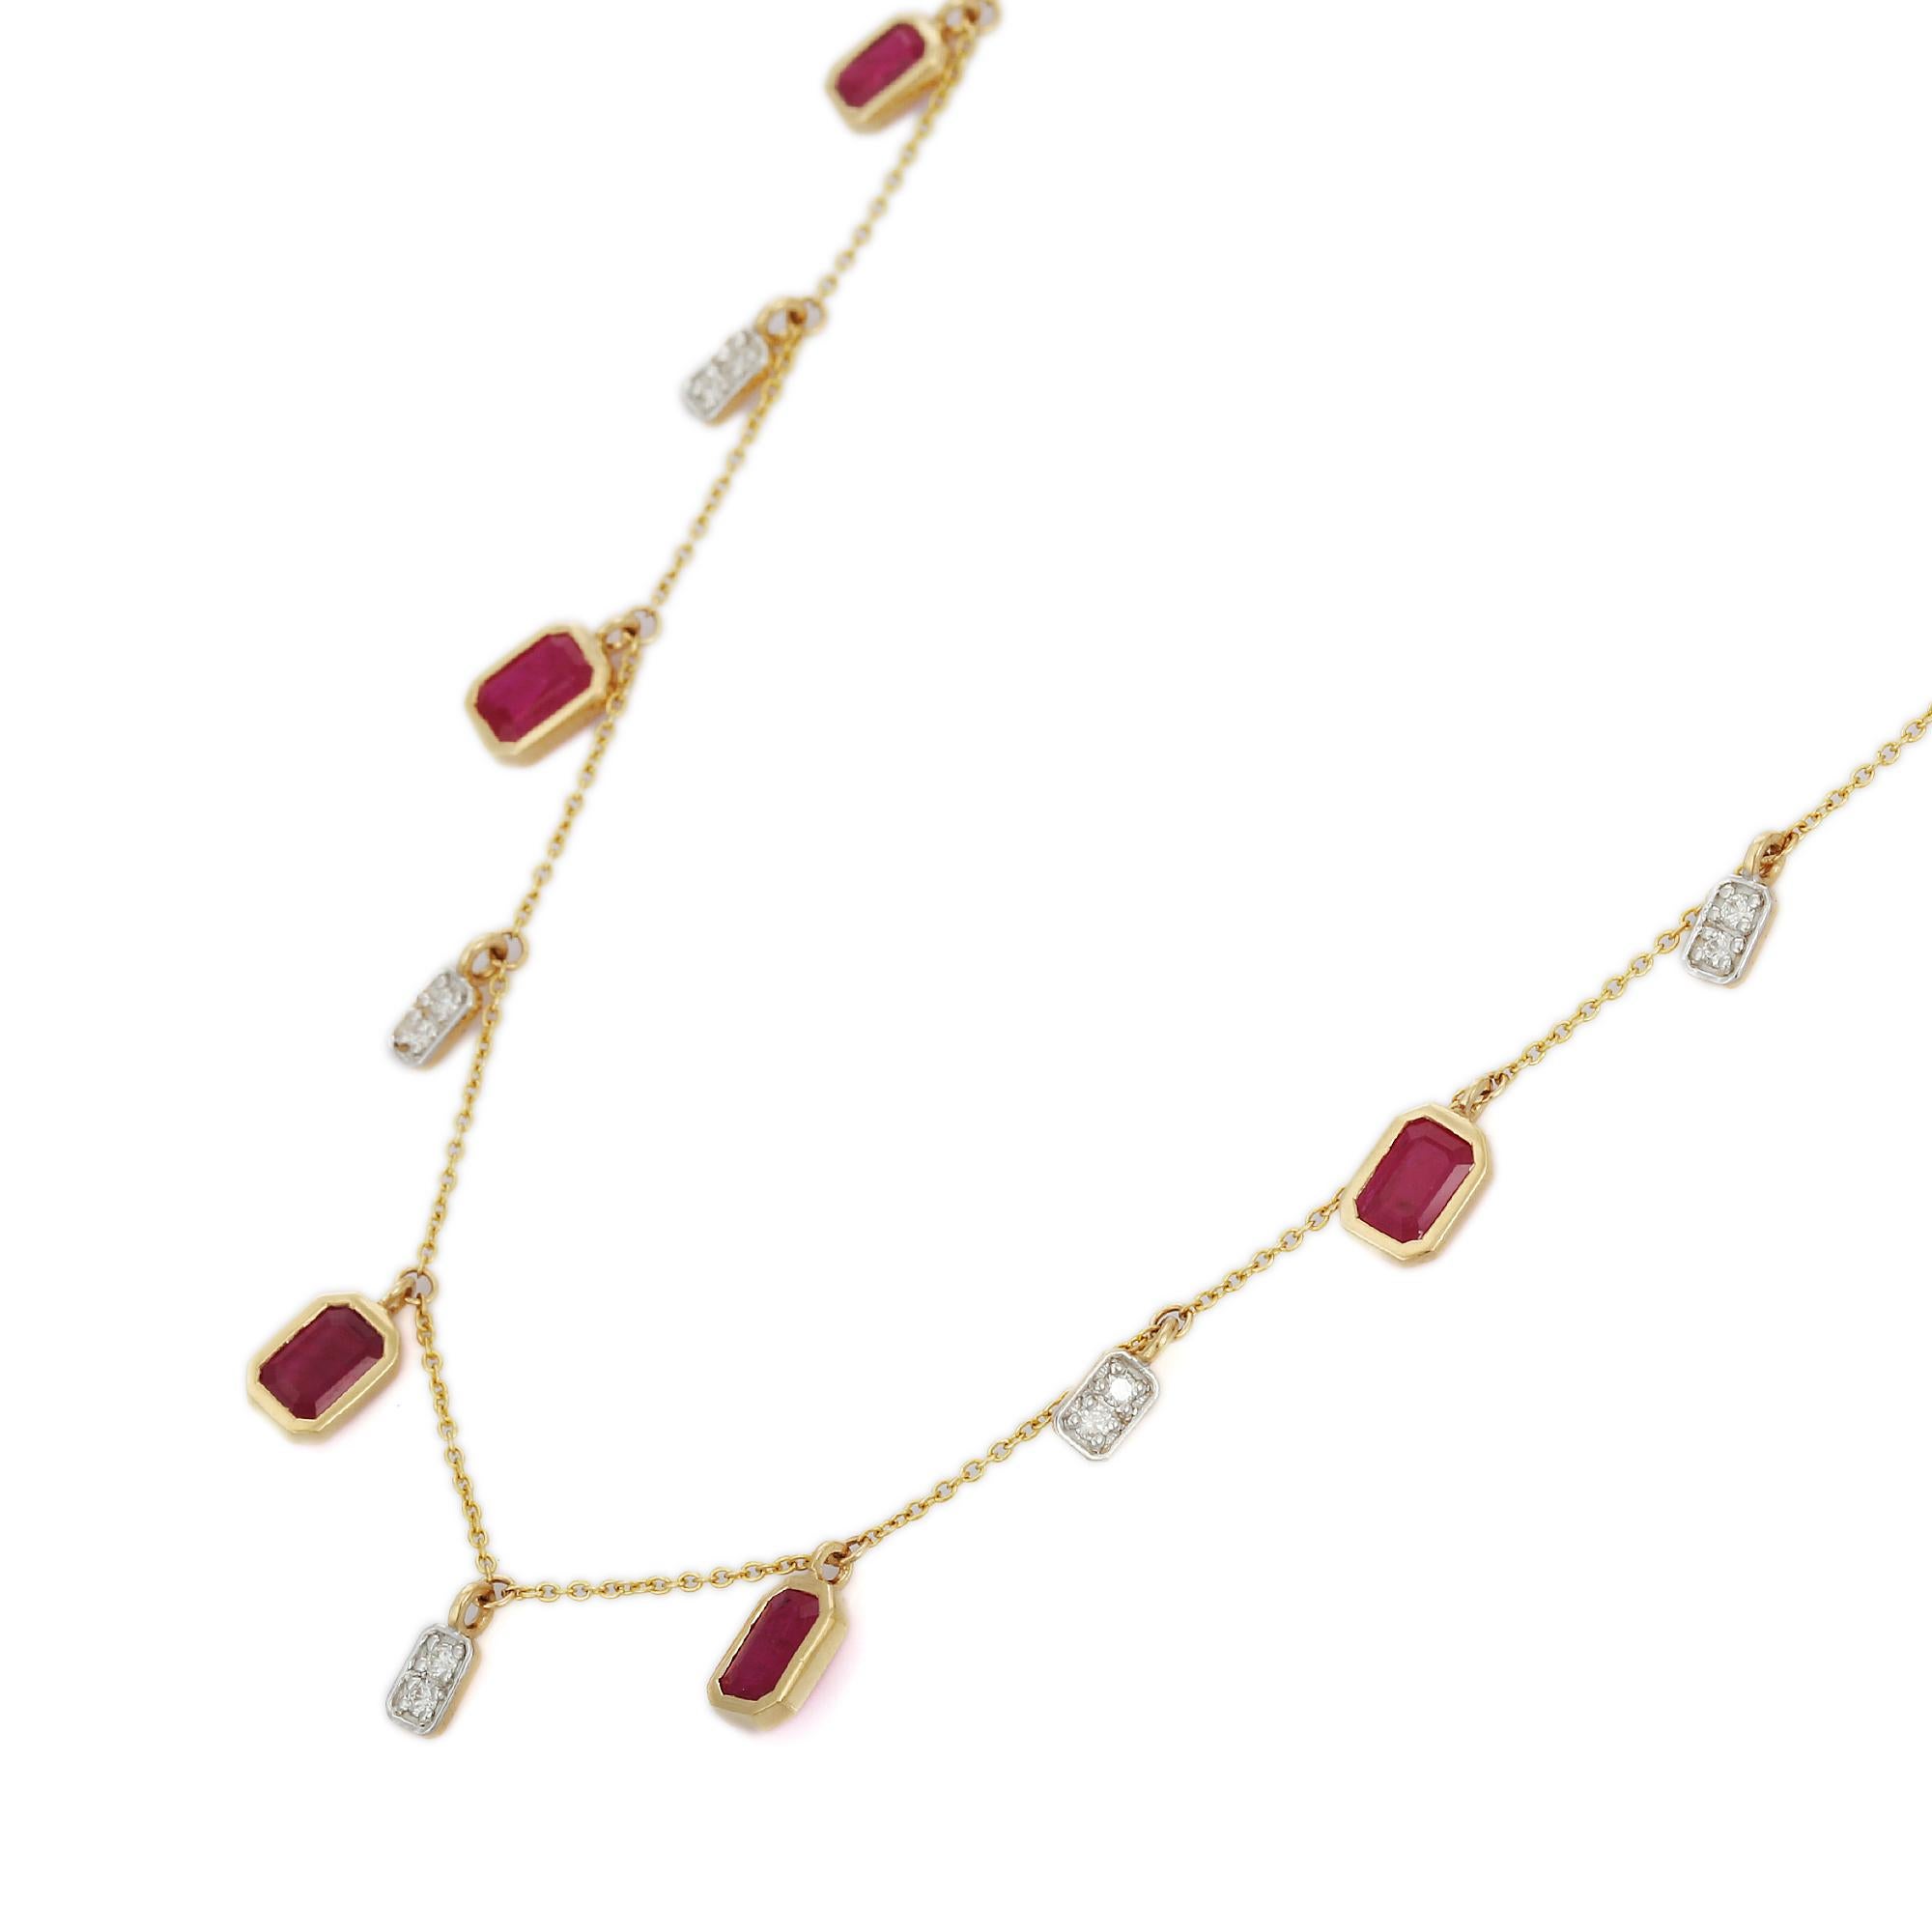 Ruby Necklace in 18K Gold studded with octagon cut ruby pieces and diamonds.
Accessorize your look with this elegant ruby drop necklace. This stunning piece of jewelry instantly elevates a casual look or dressy outfit. Comfortable and easy to wear,